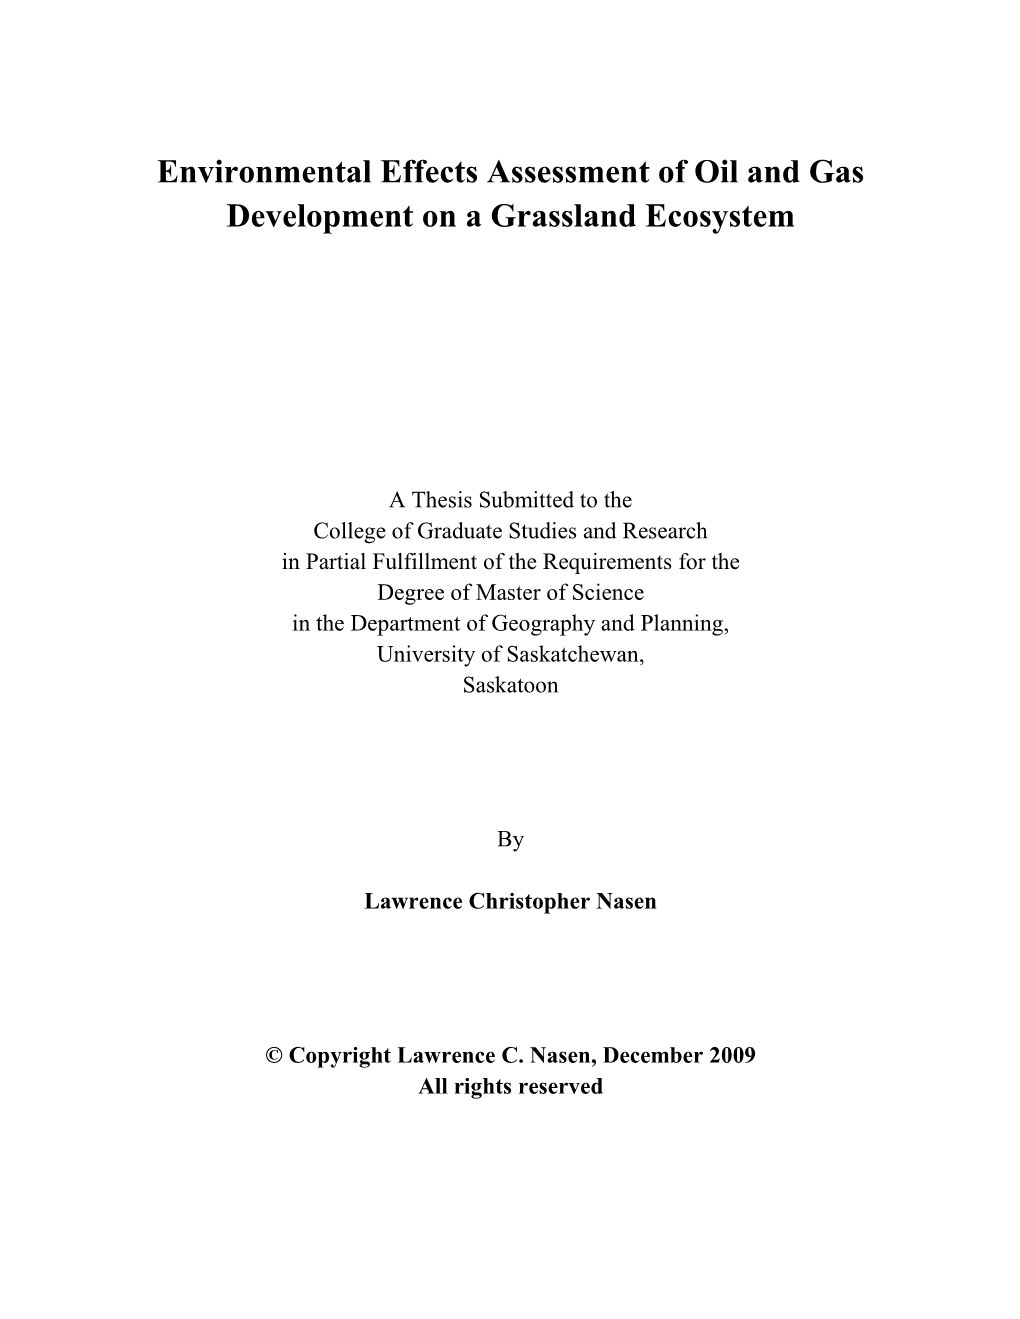 Environmental Effects Assessment of Oil and Gas Development on a Grassland Ecosystem